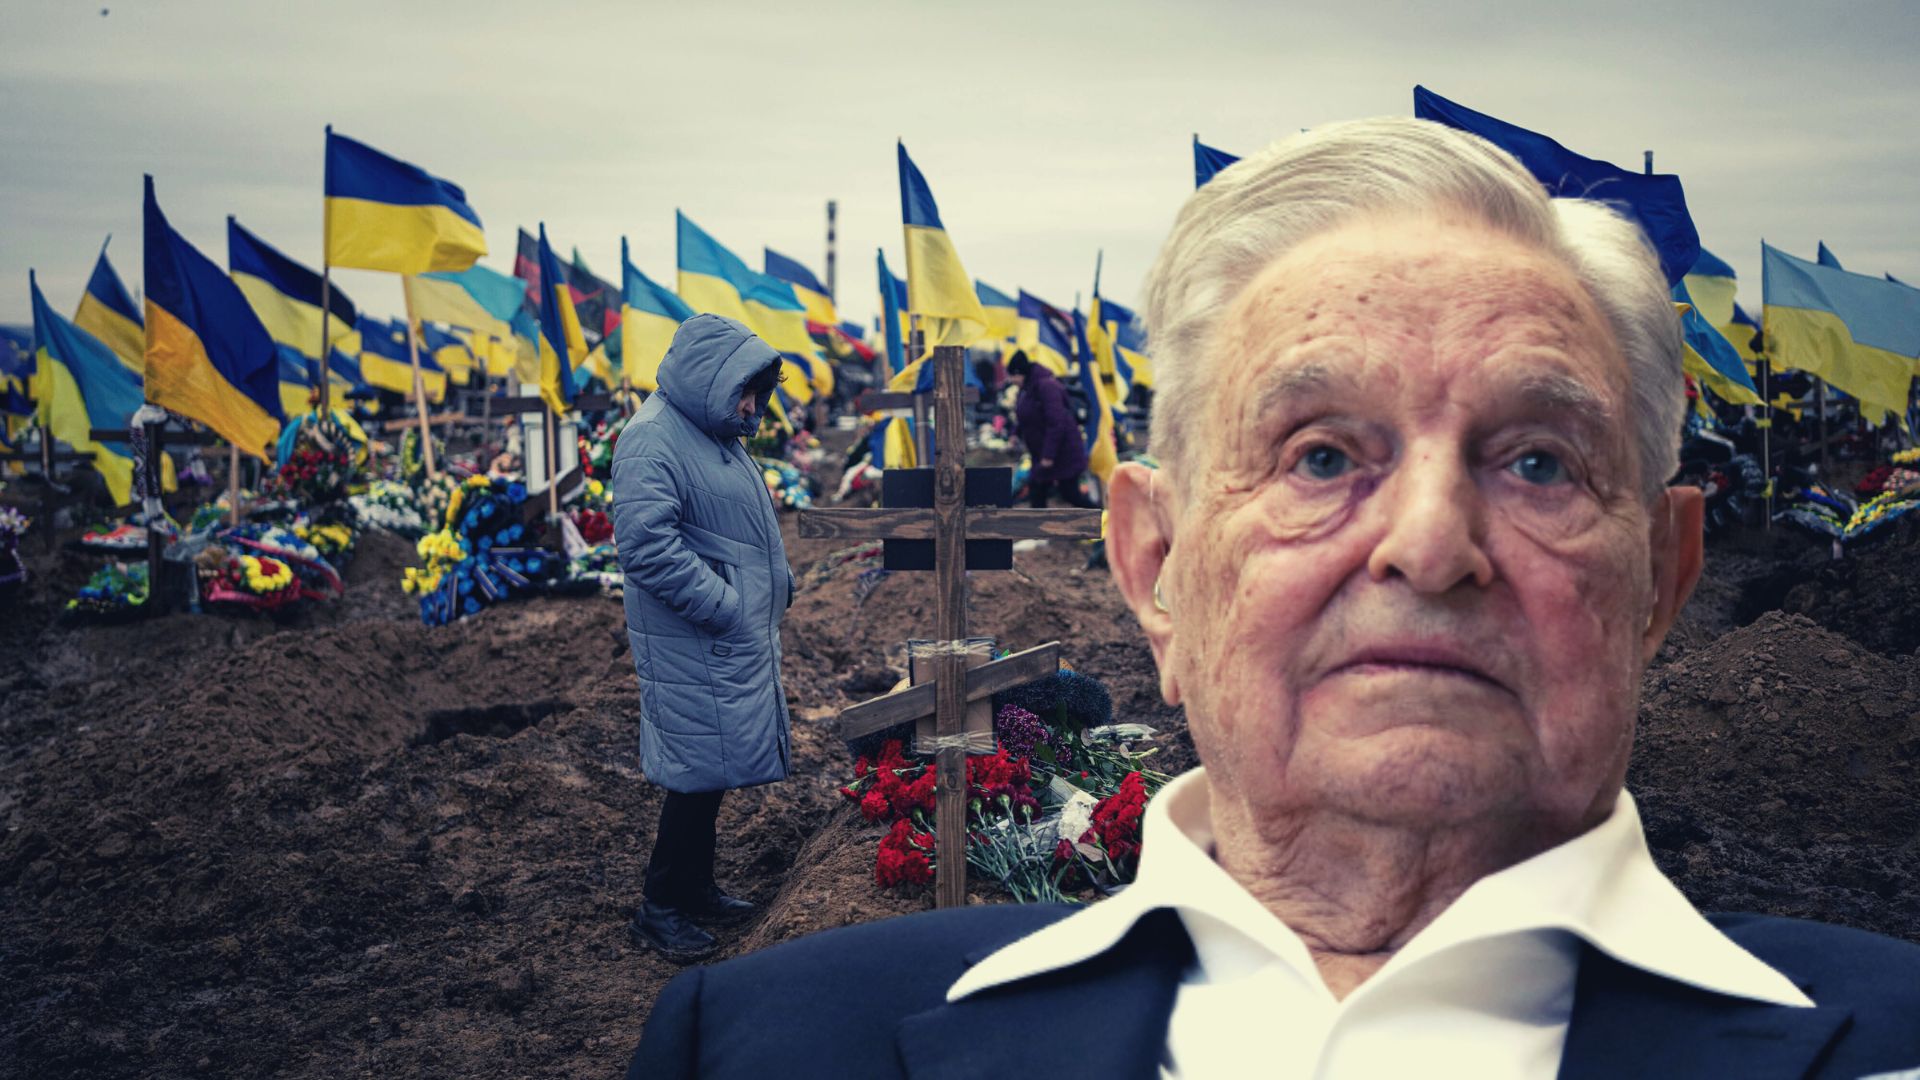 George Soros called for NATO to use Eastern European soldiers to 'reduce the risk of body bags for NATO countries' in 1993 'New World Order' article